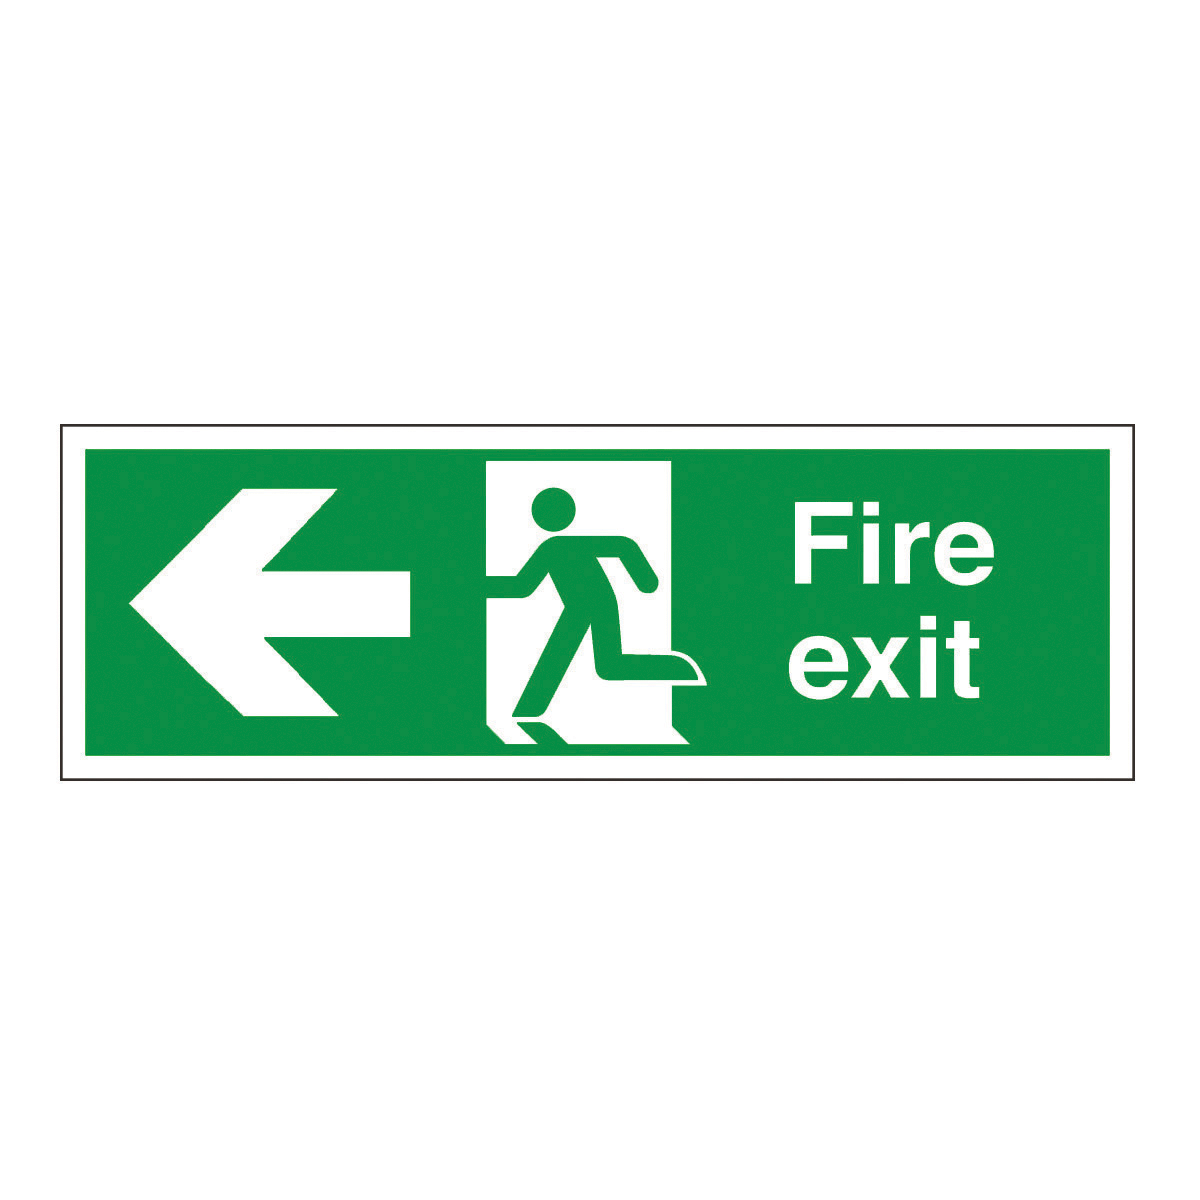 Fire Exit Sign Regulations images